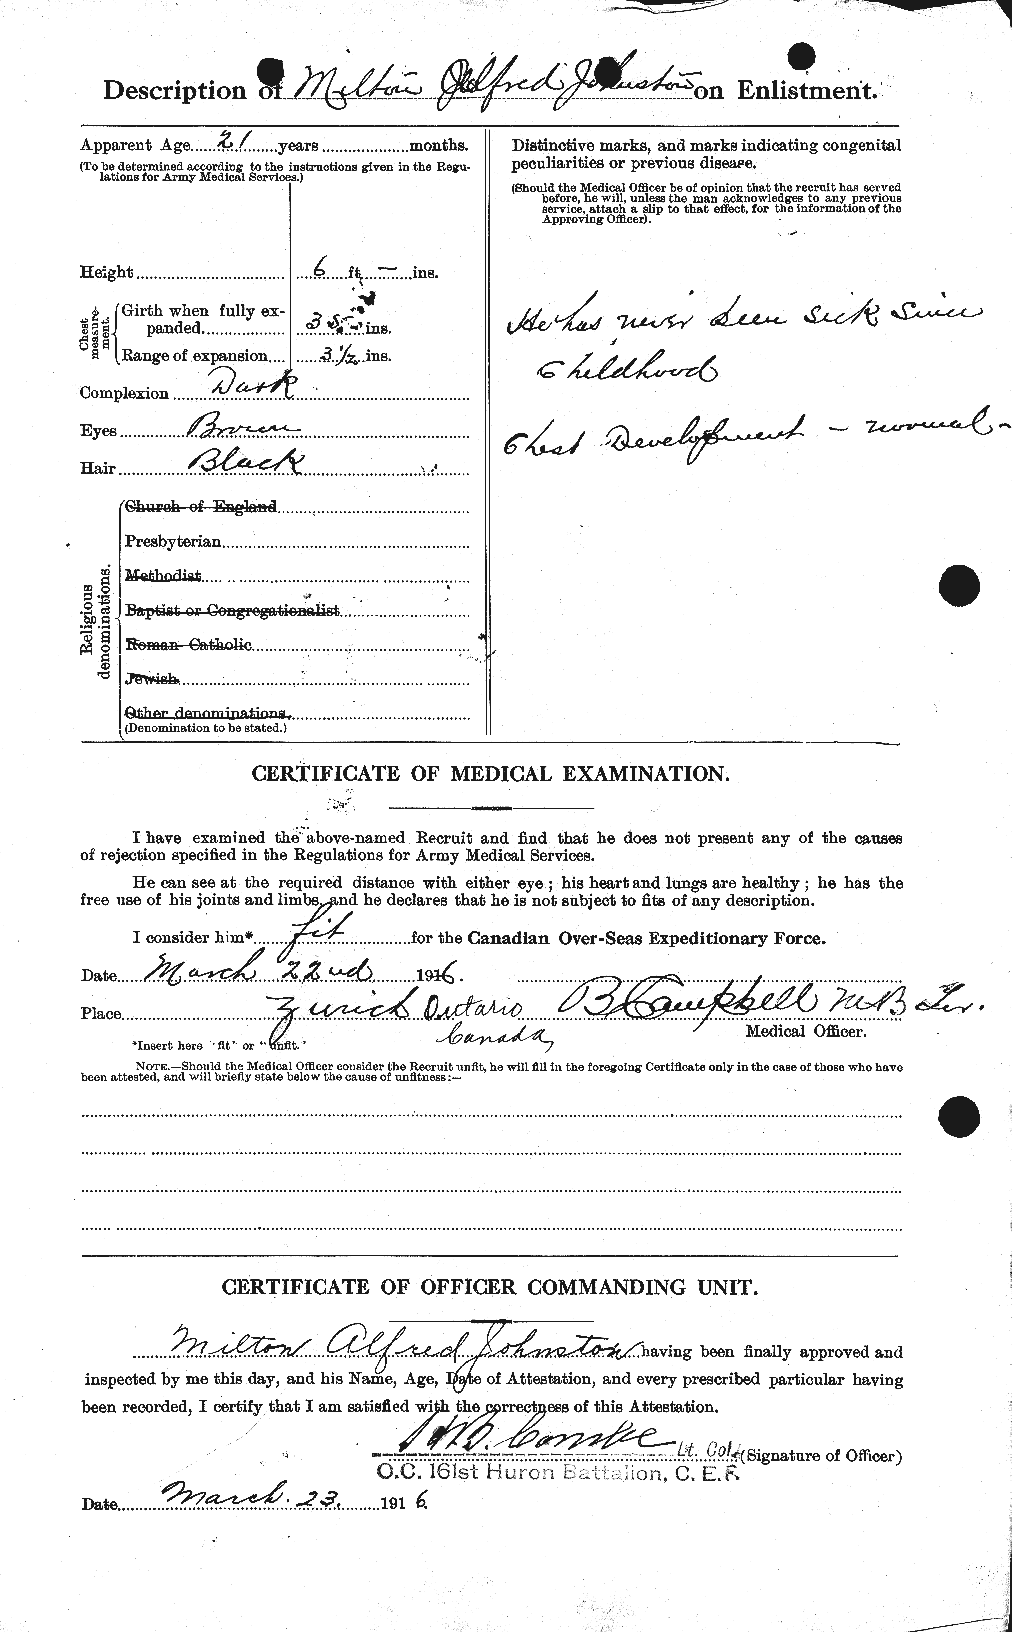 Personnel Records of the First World War - CEF 422991b